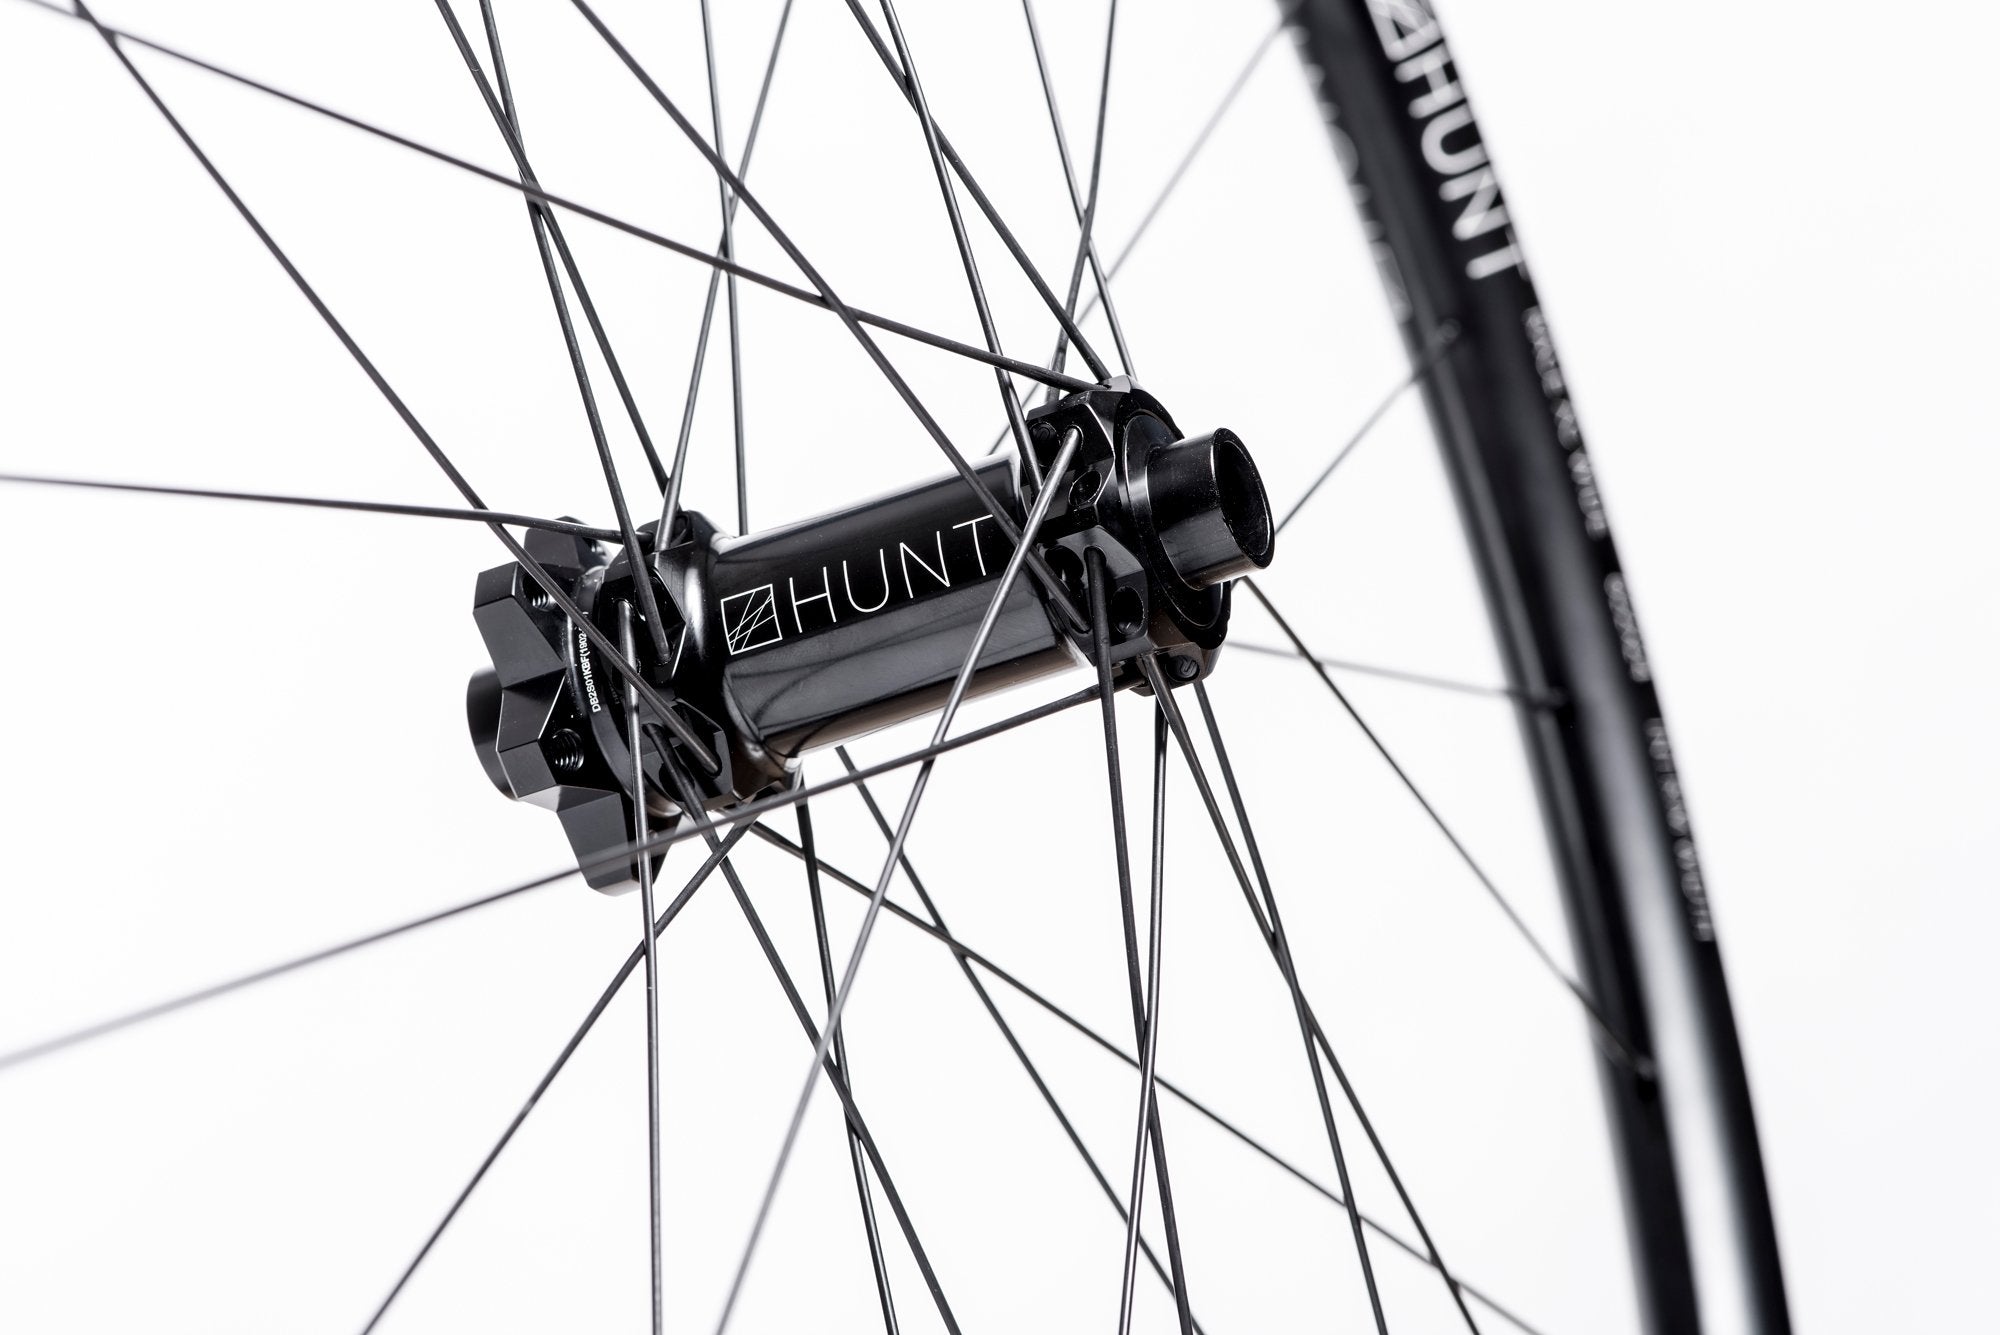 <h1>Front Hub</h1><i>Suited to match the needs of the modern trail bike rider. Featuring durable bearings and 7075-T6 series alloy axles to increase stiffness. These hubs have been selected based on their ability to perform on the most aggressive trails.</i>